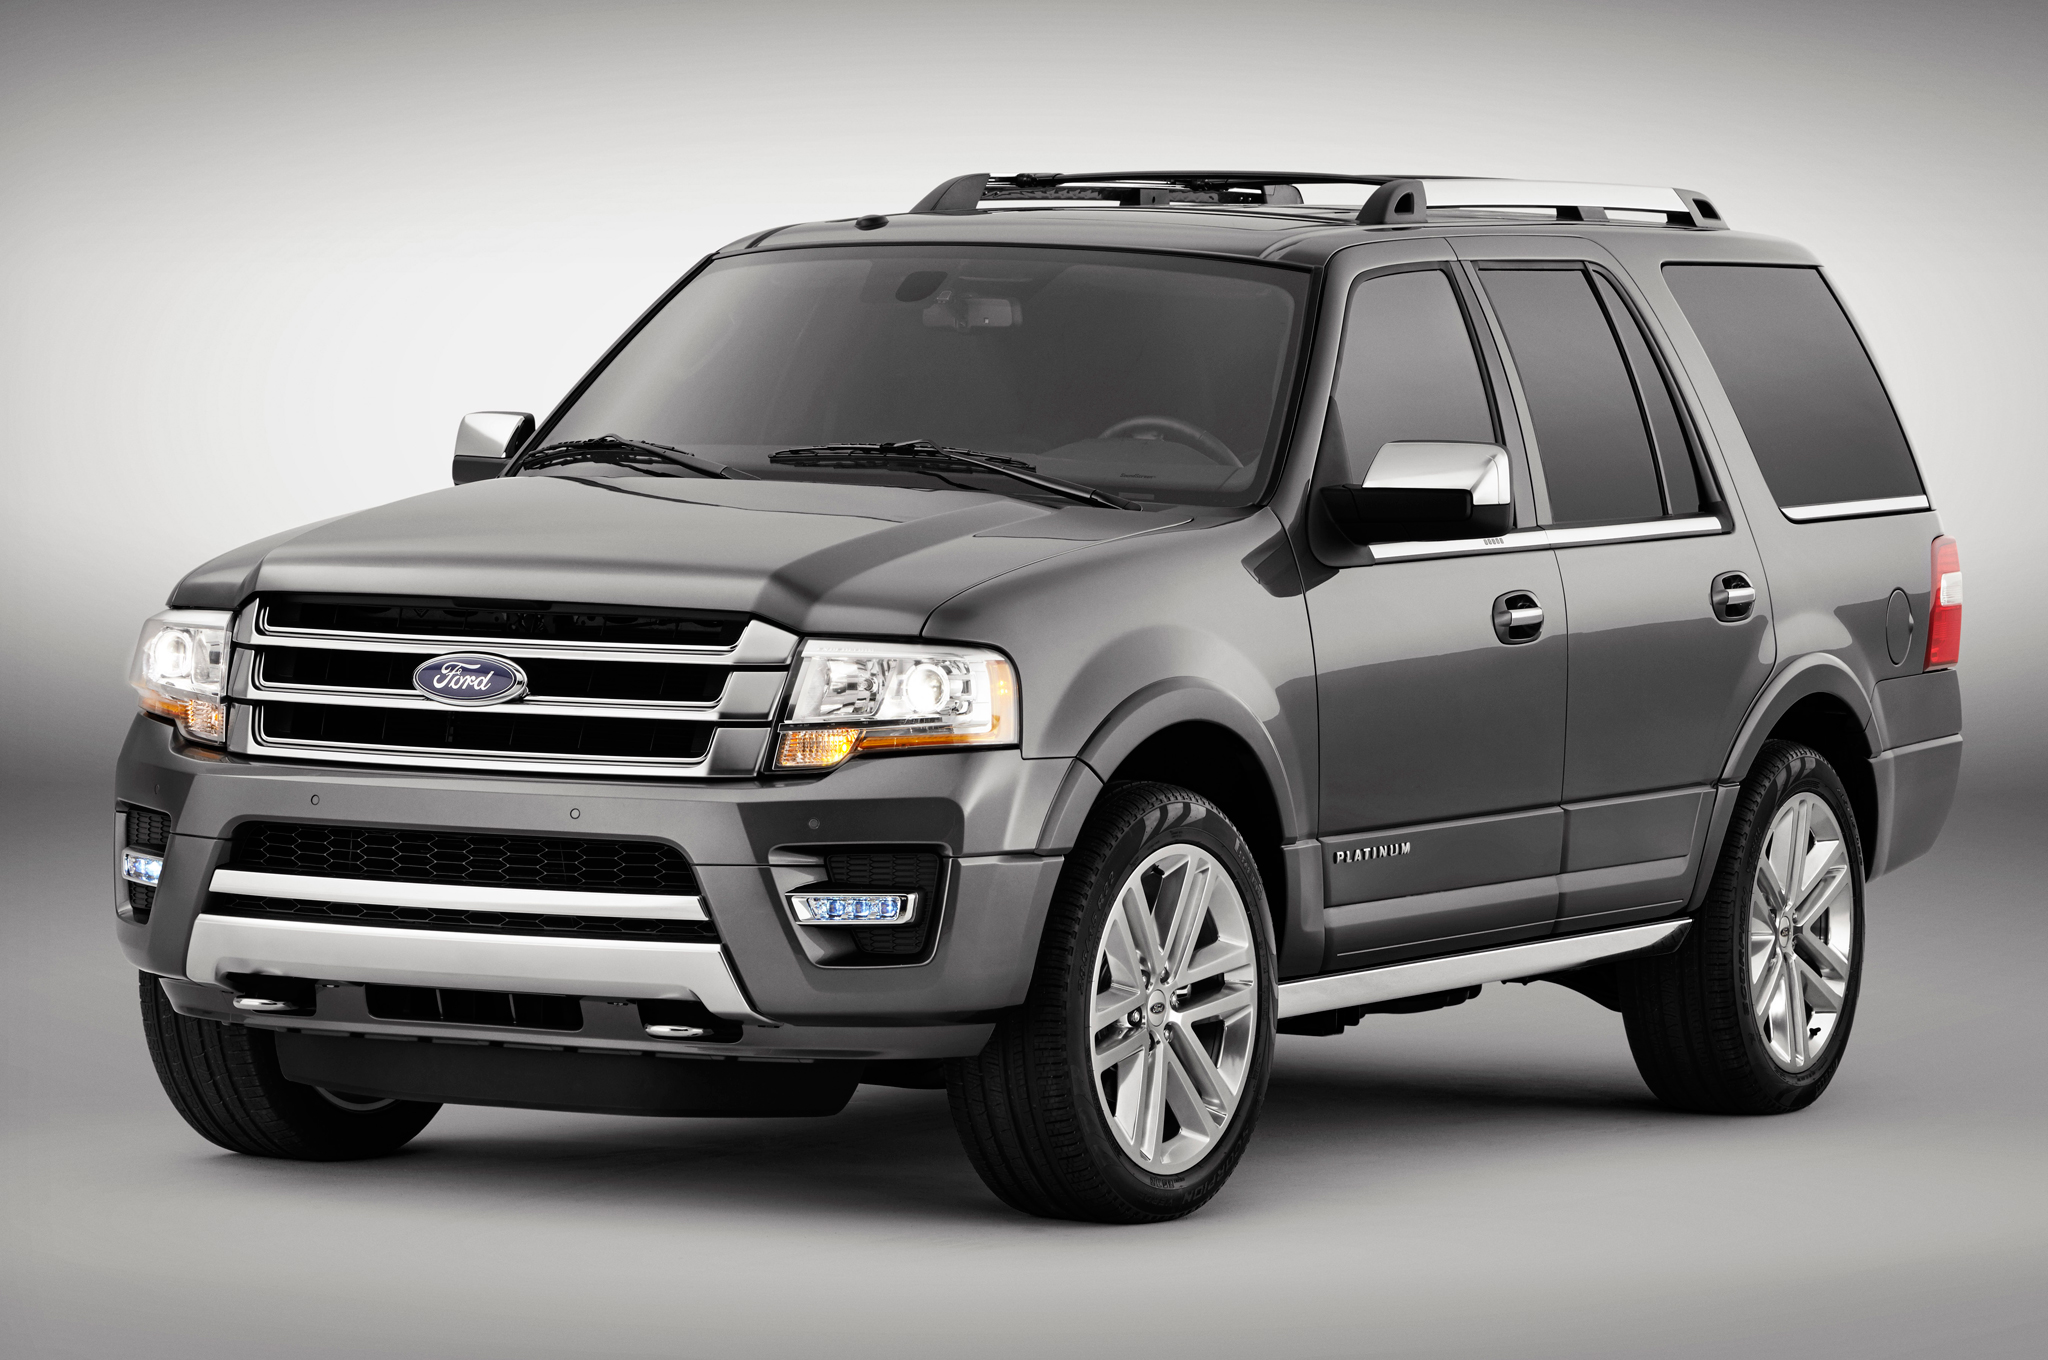 2015 Expedition #8